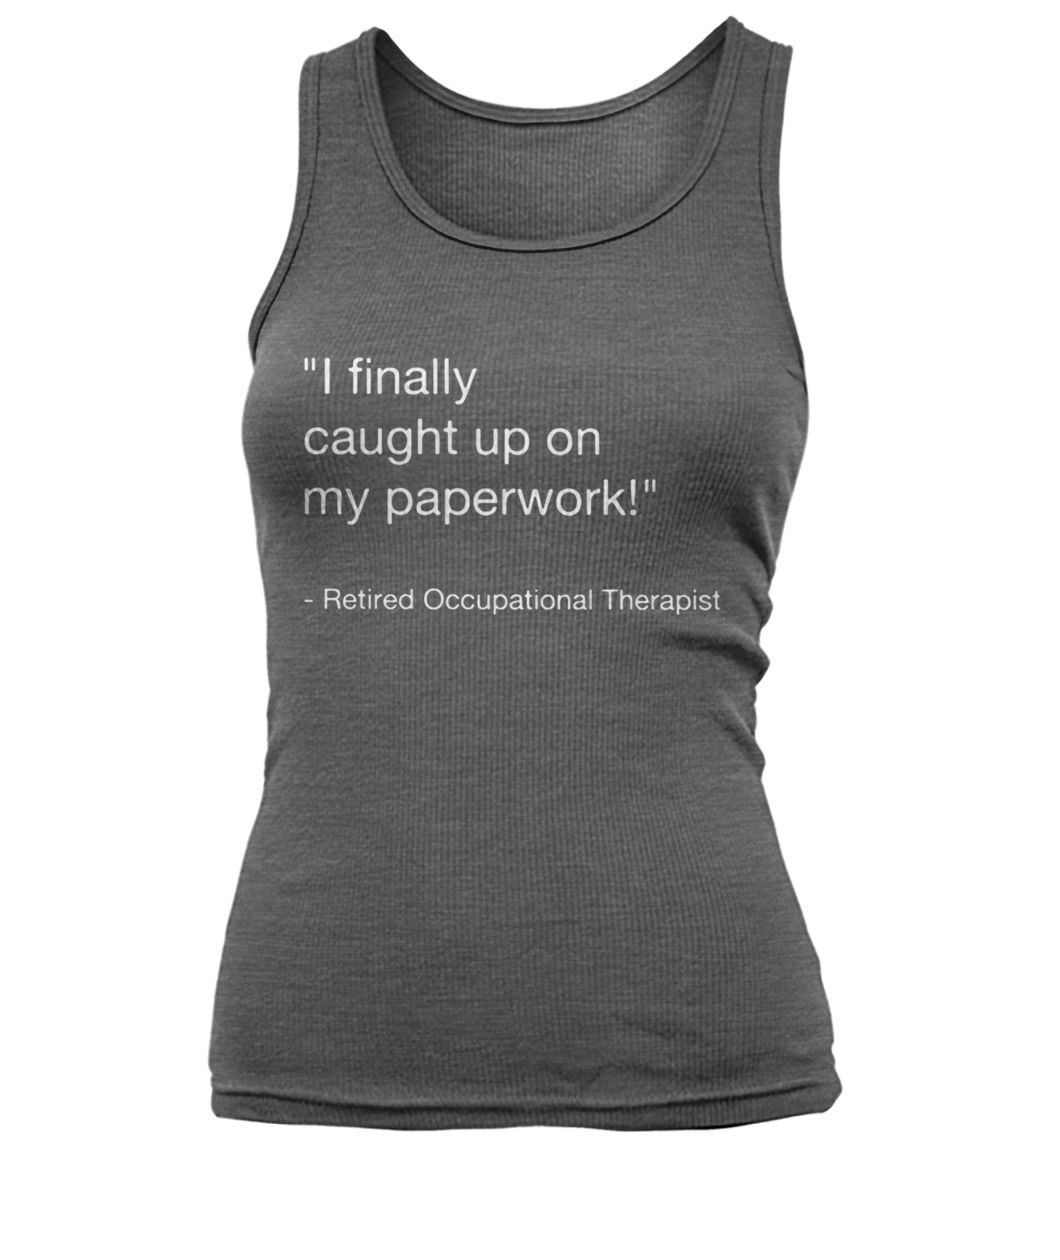 I finally caught up on paperwork retired occupational therapist women's tank top